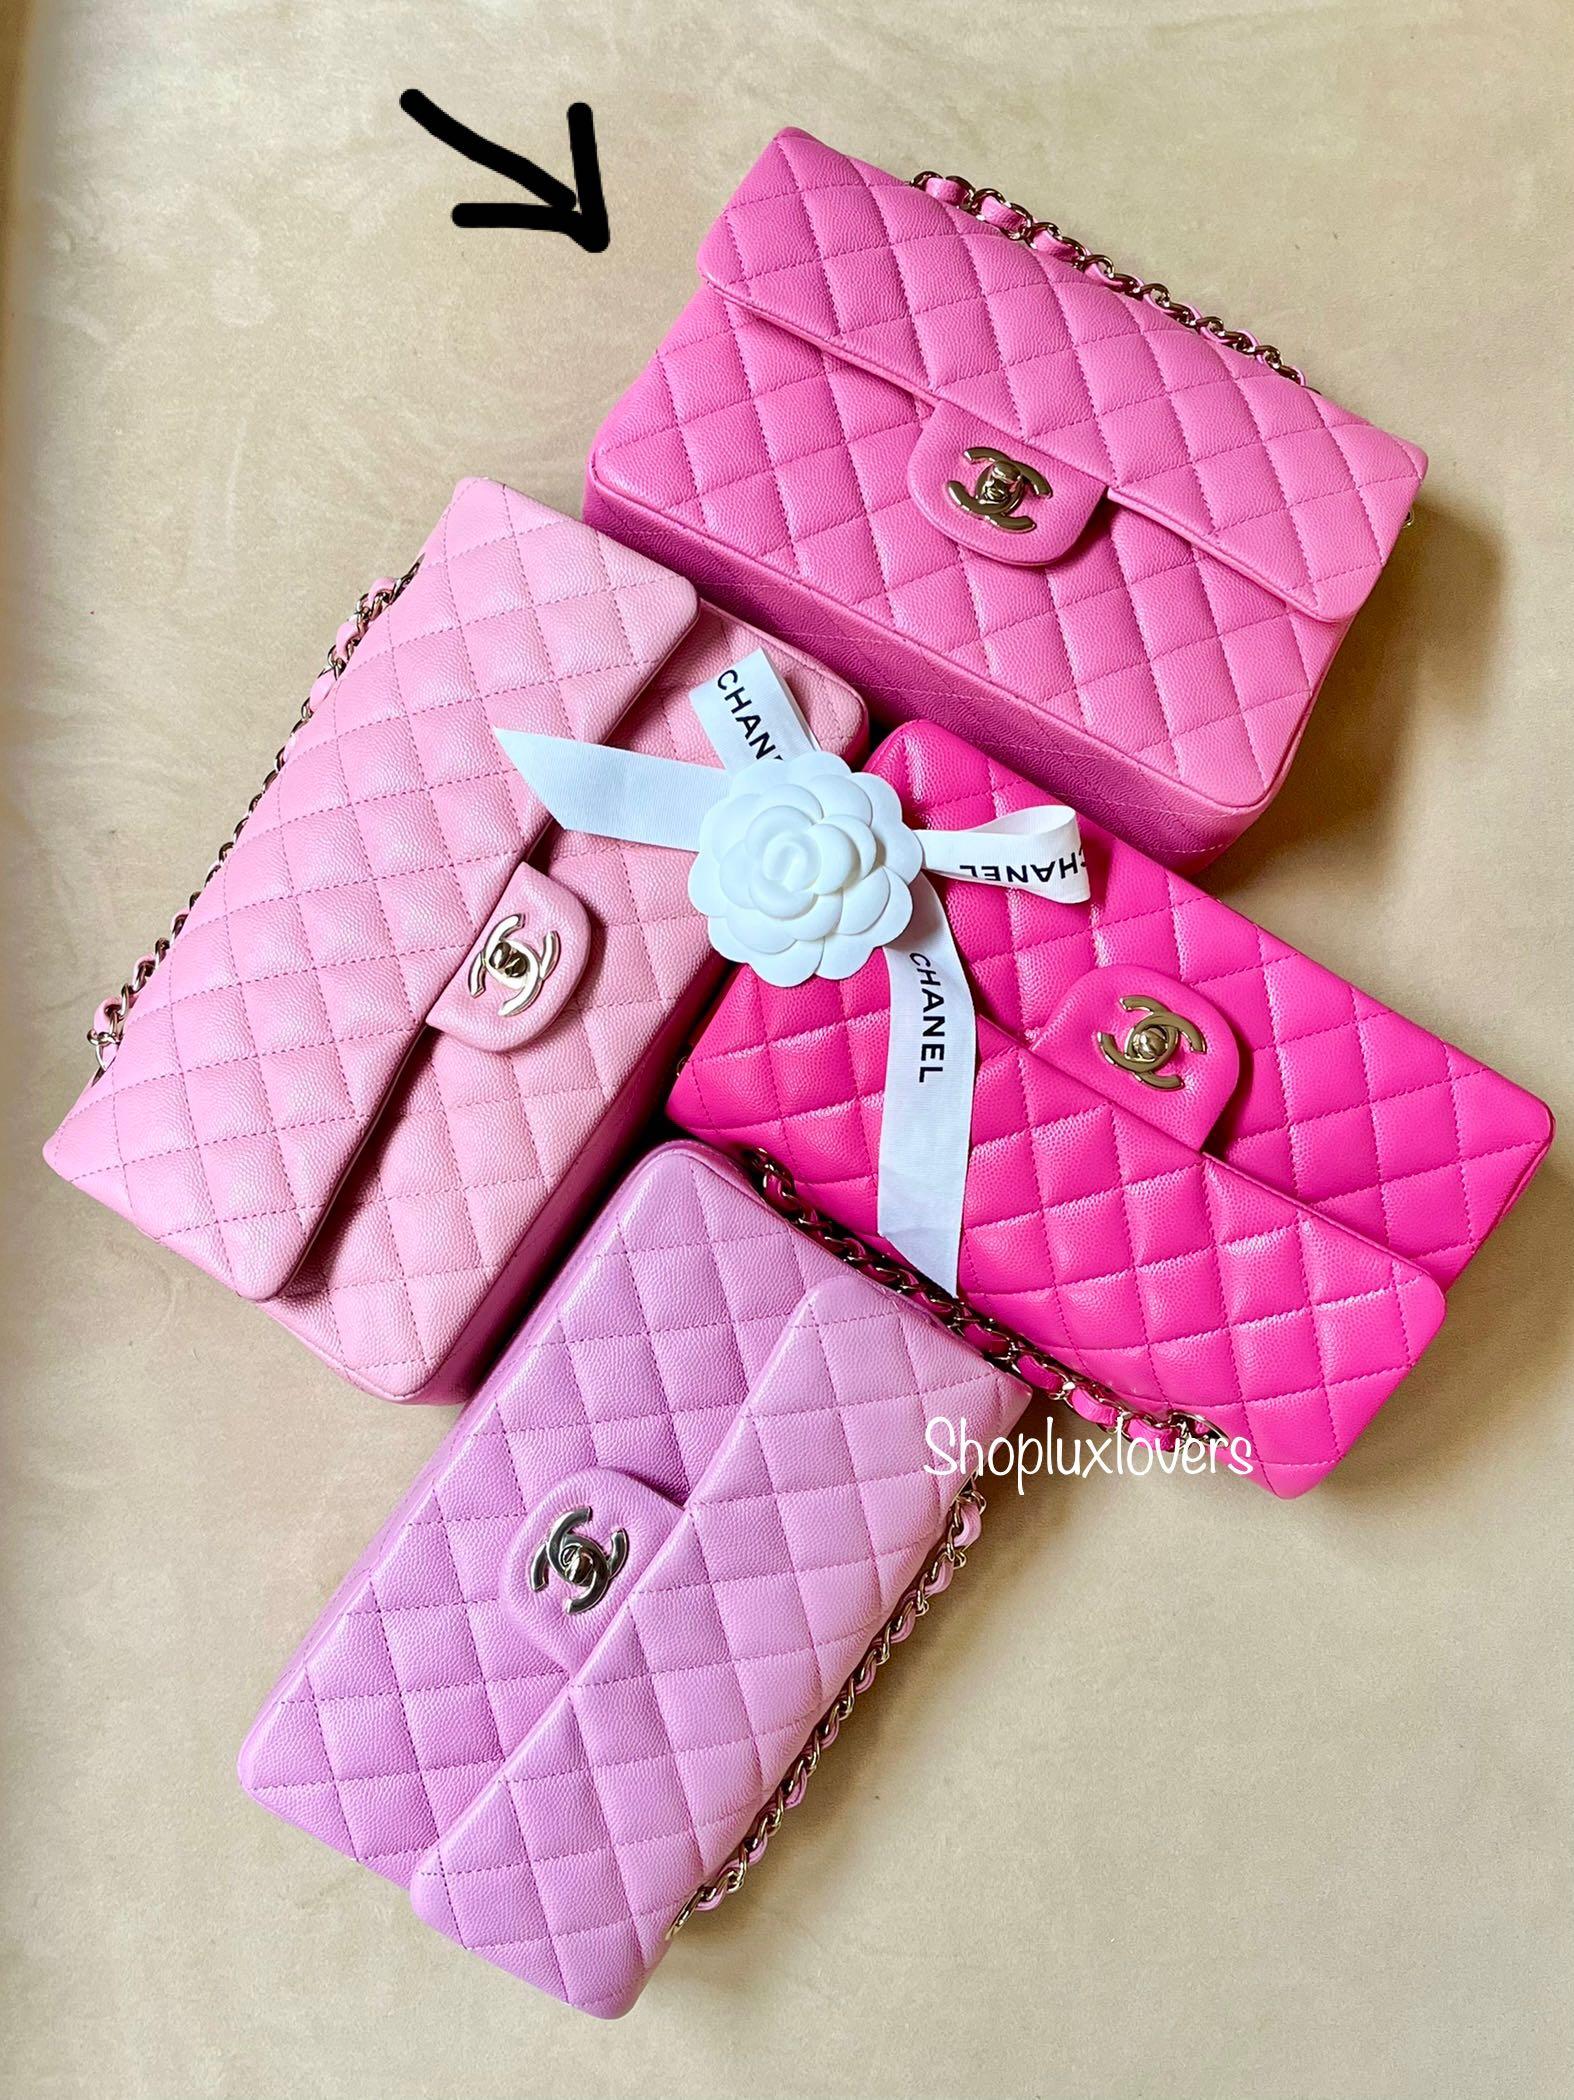 CHANEL, Bags, Chanel Barbie Pink Caviar Leather Mini Coco Handle Flap Bag